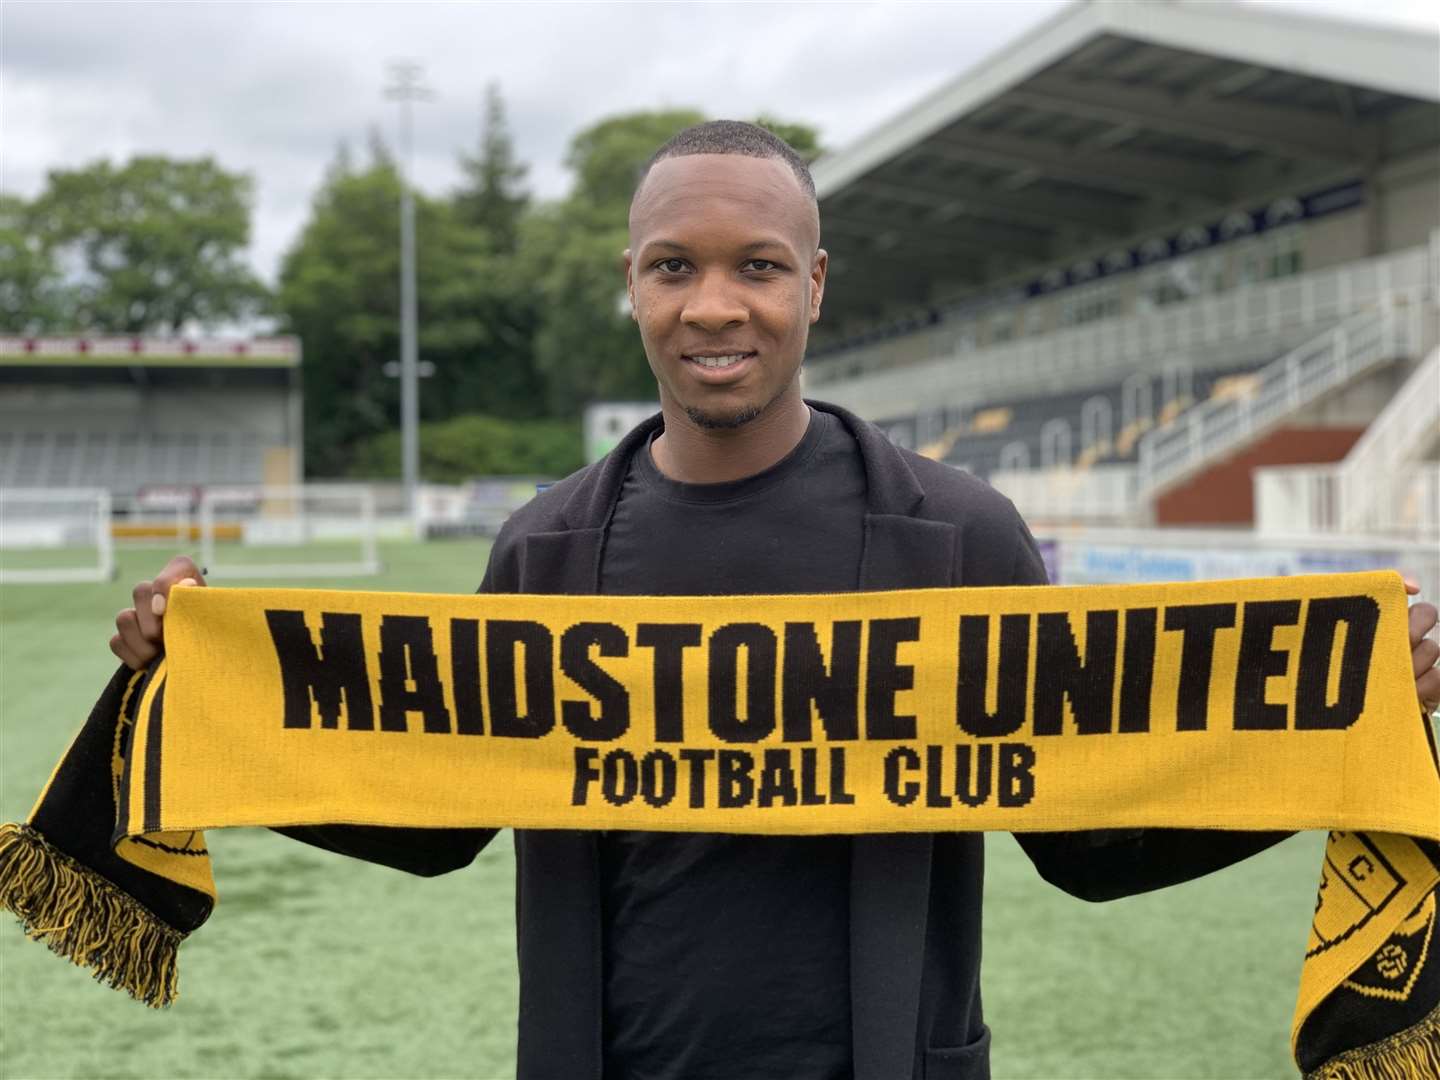 Gavin Hoyte is among the new faces at Maidstone